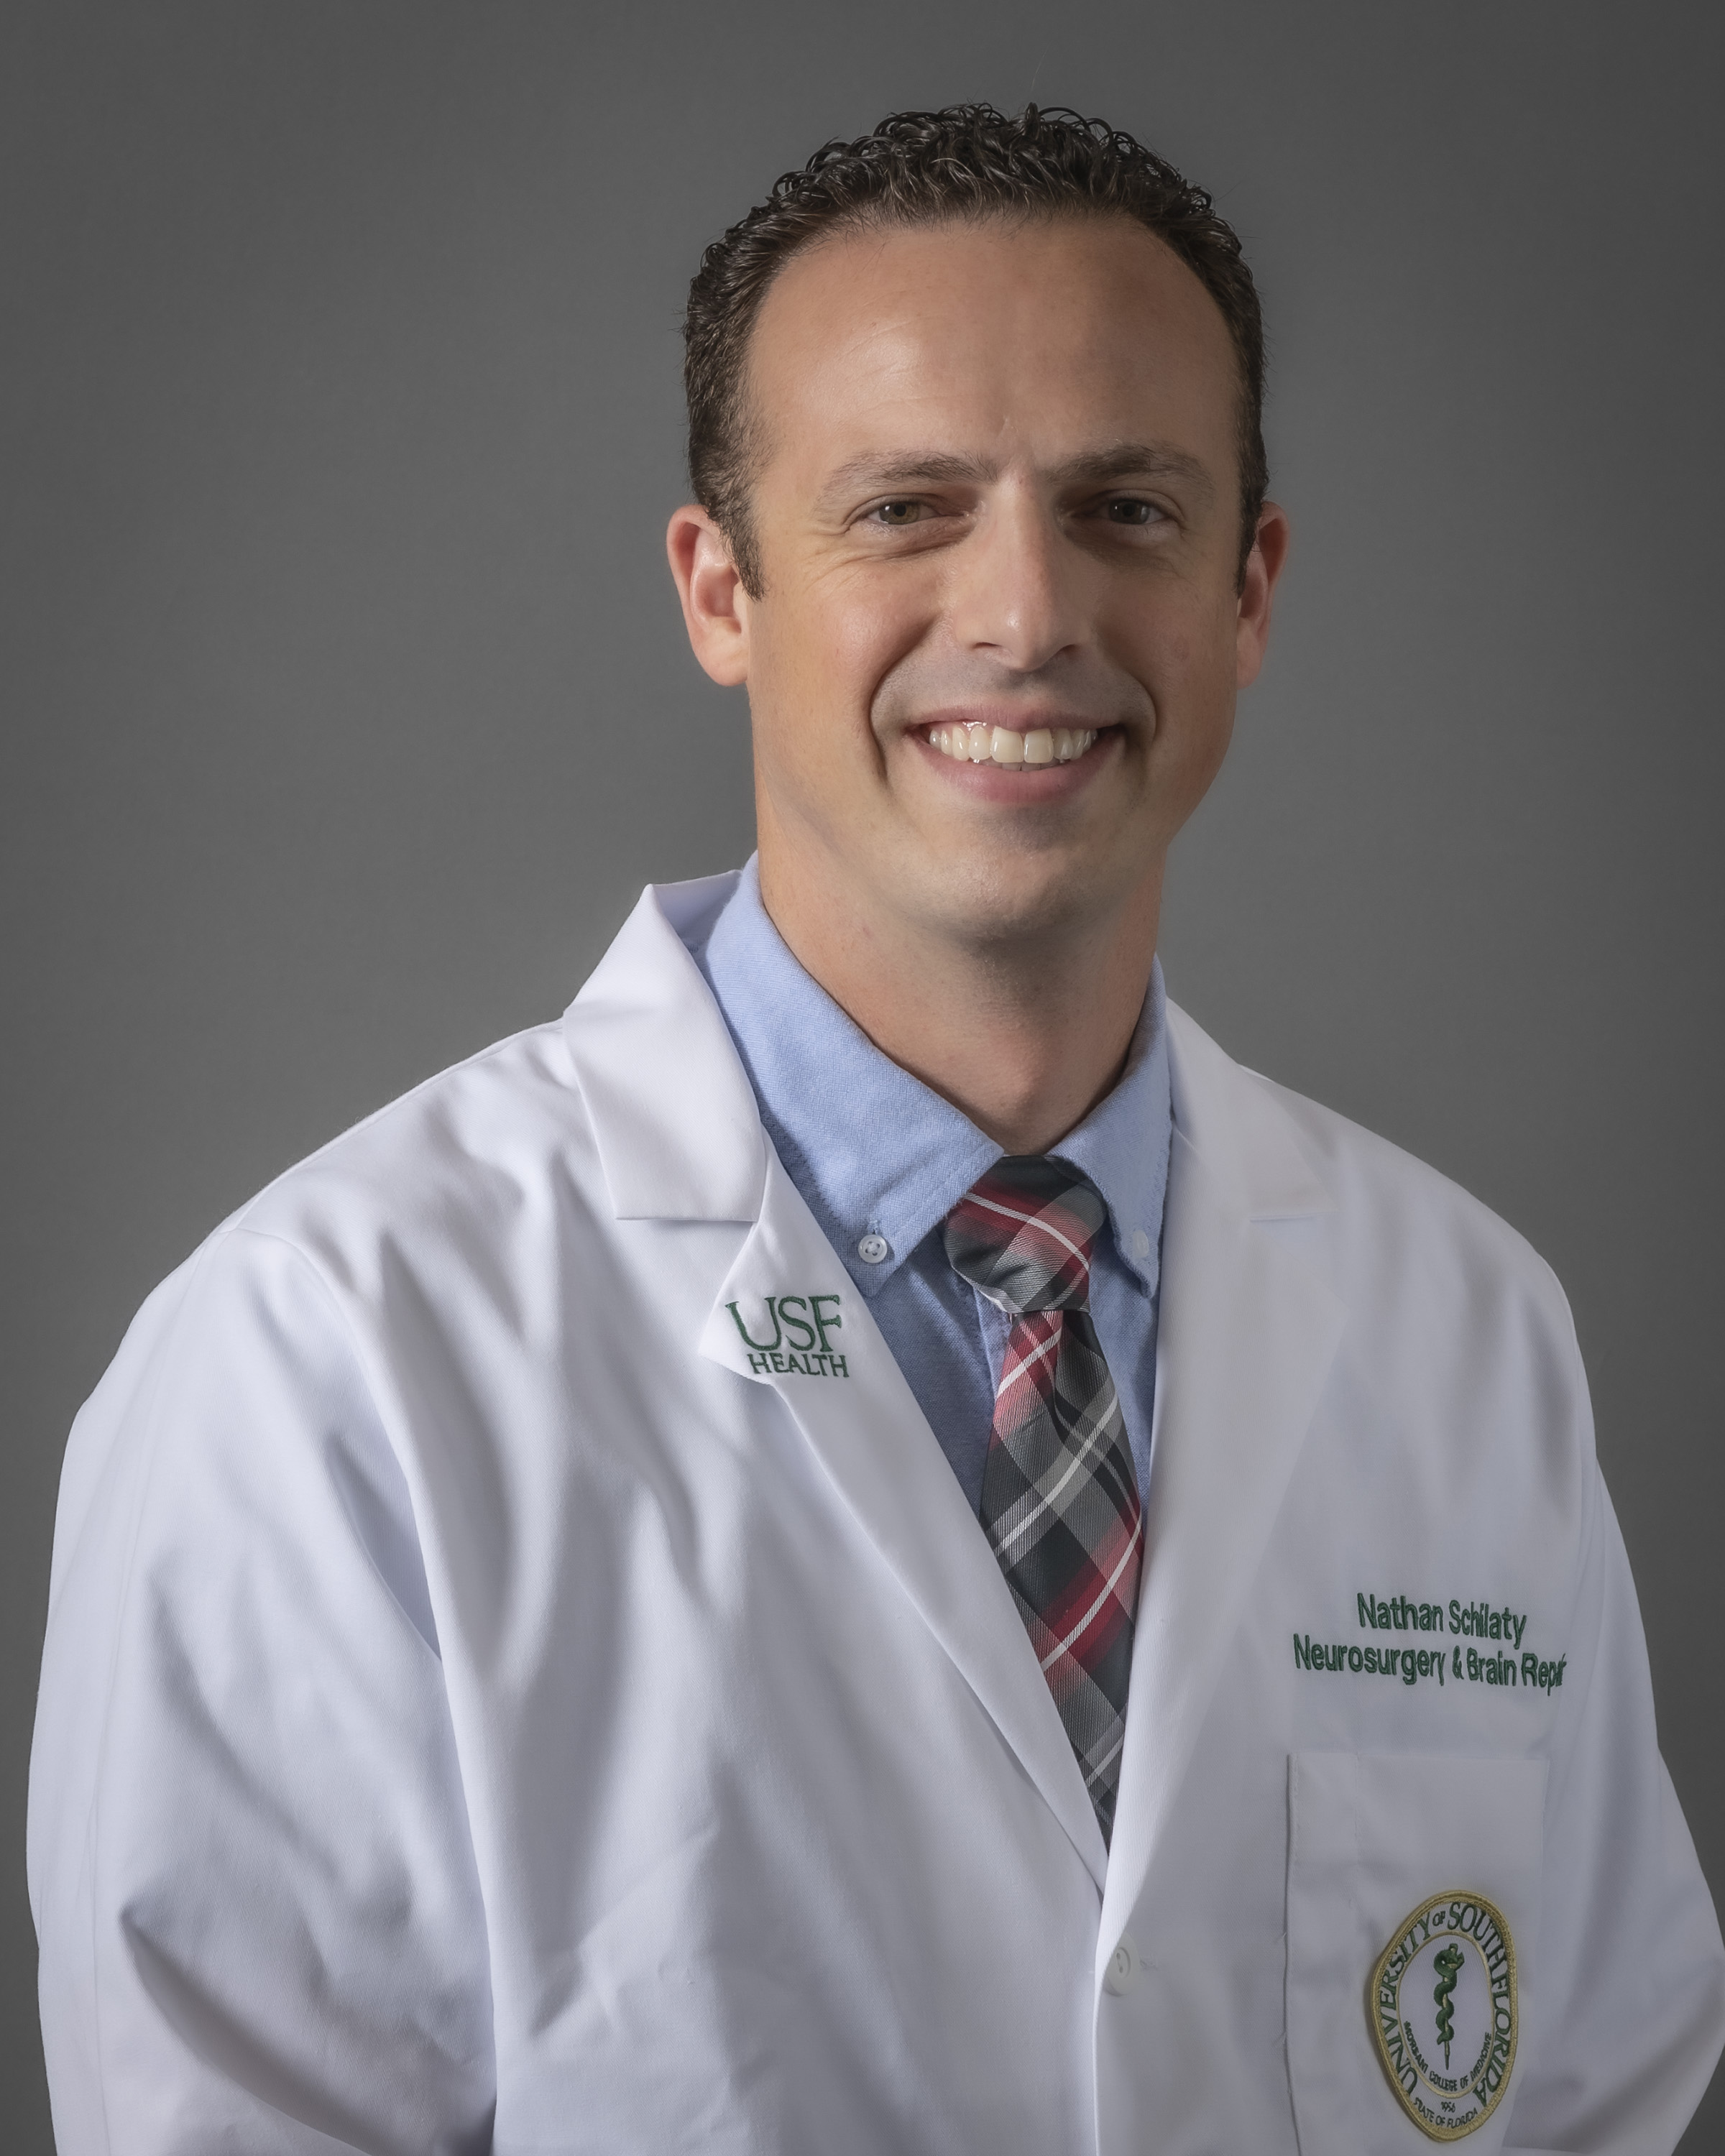 Headshot of Dr. Nathan Schilaty in a medical white coat for USF Health Neurosurgery